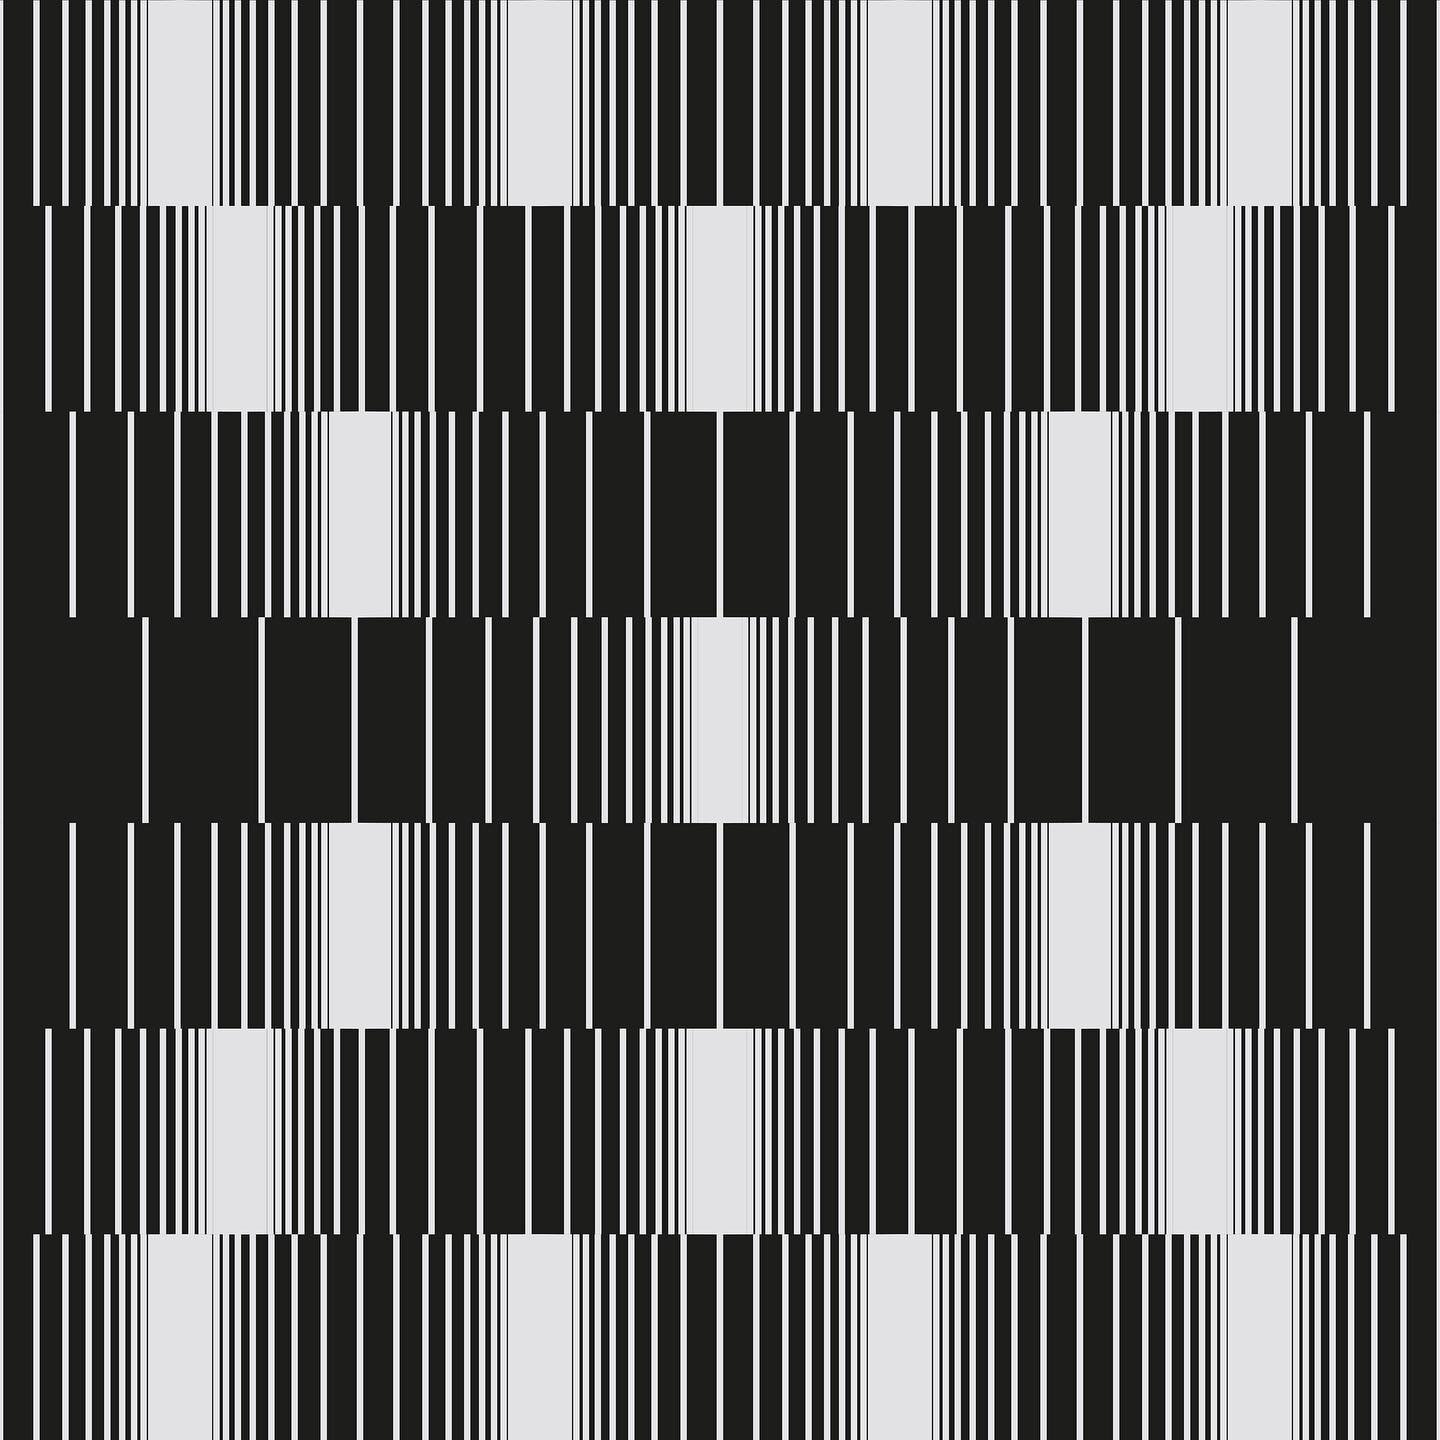 Pattern explorations 221211_09478 at @diatomicstudio 
🤖: Rhythm in patterns refers to the regular and organized repetition of elements in a temporal sequence. In the context of music, rhythm pertains to the temporal arrangement of sounds and silence